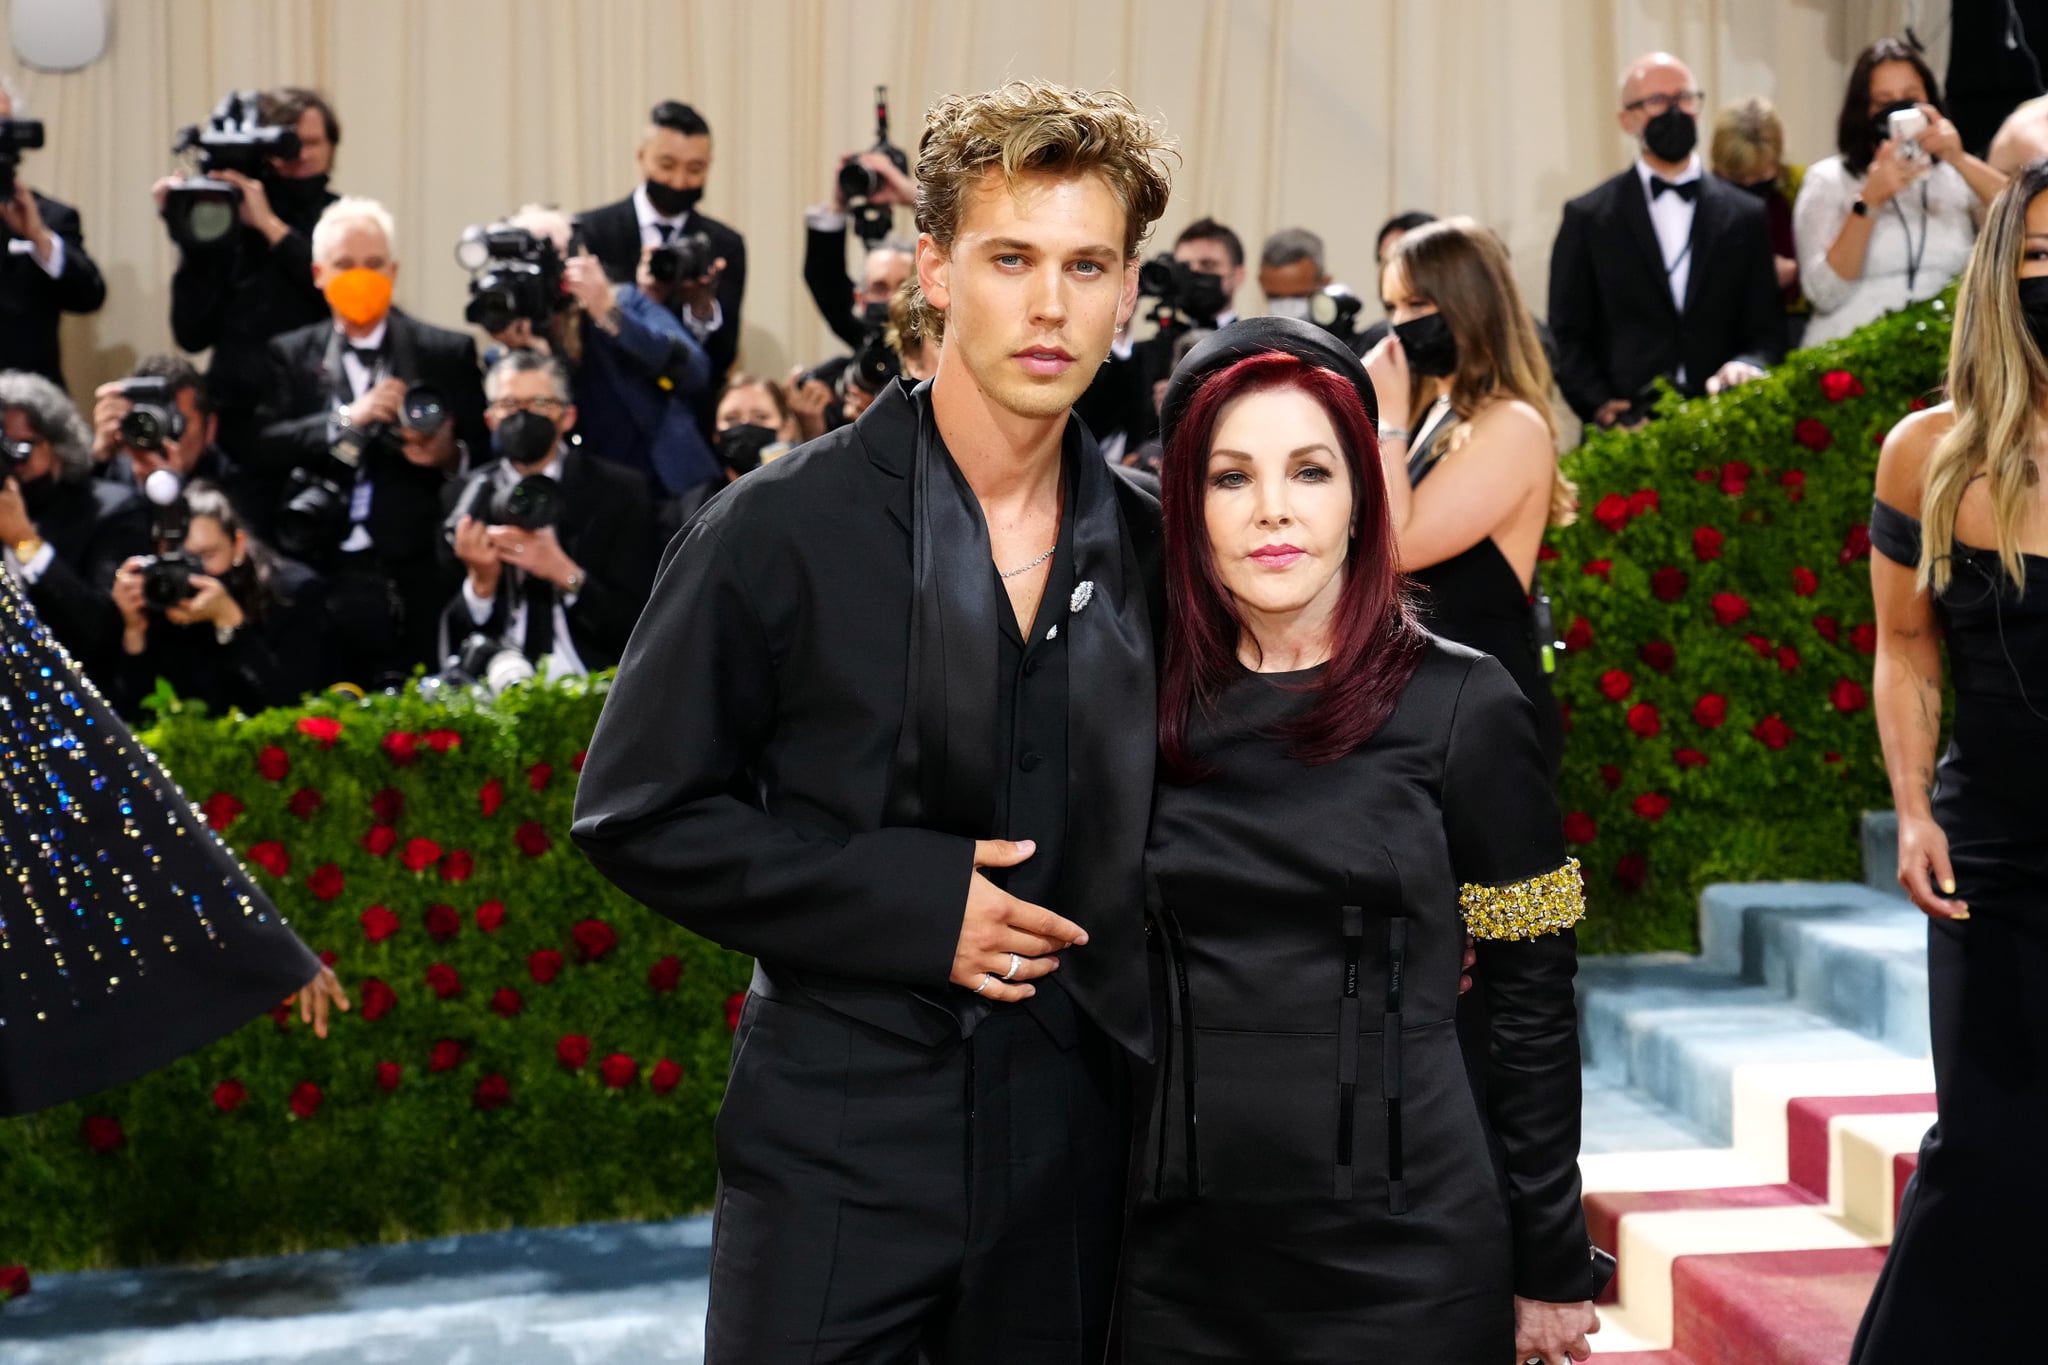 NEW YORK, NEW YORK - MAY 02: (LR) Austin Butler and Priscilla Presley attend The 2022 Met Gala Celebrating